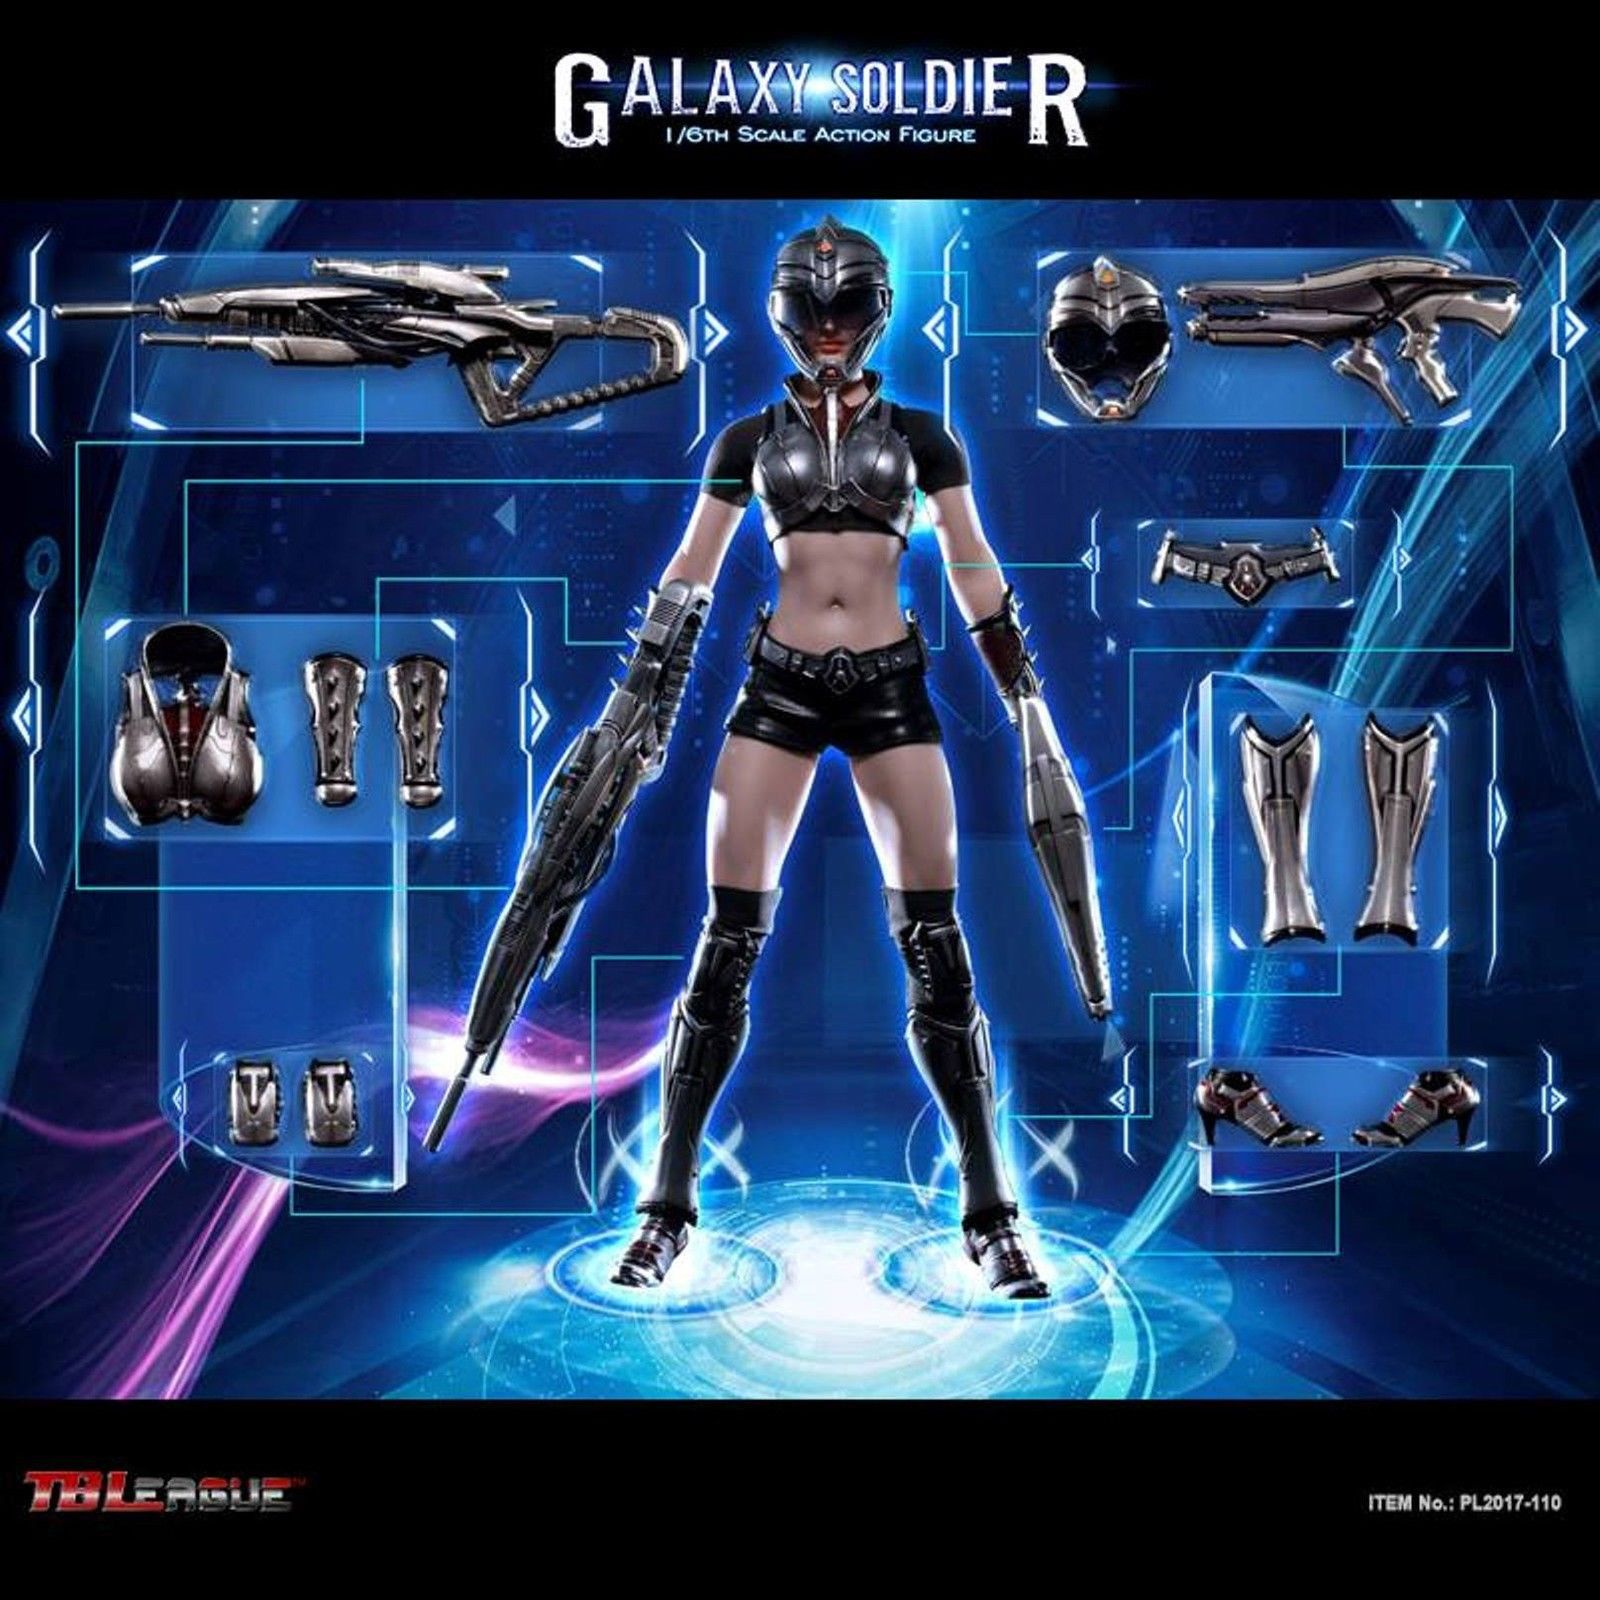 Body Only Galaxy Soldier Seamless Nude Body - 1/6 Scale Phicen Action Figure